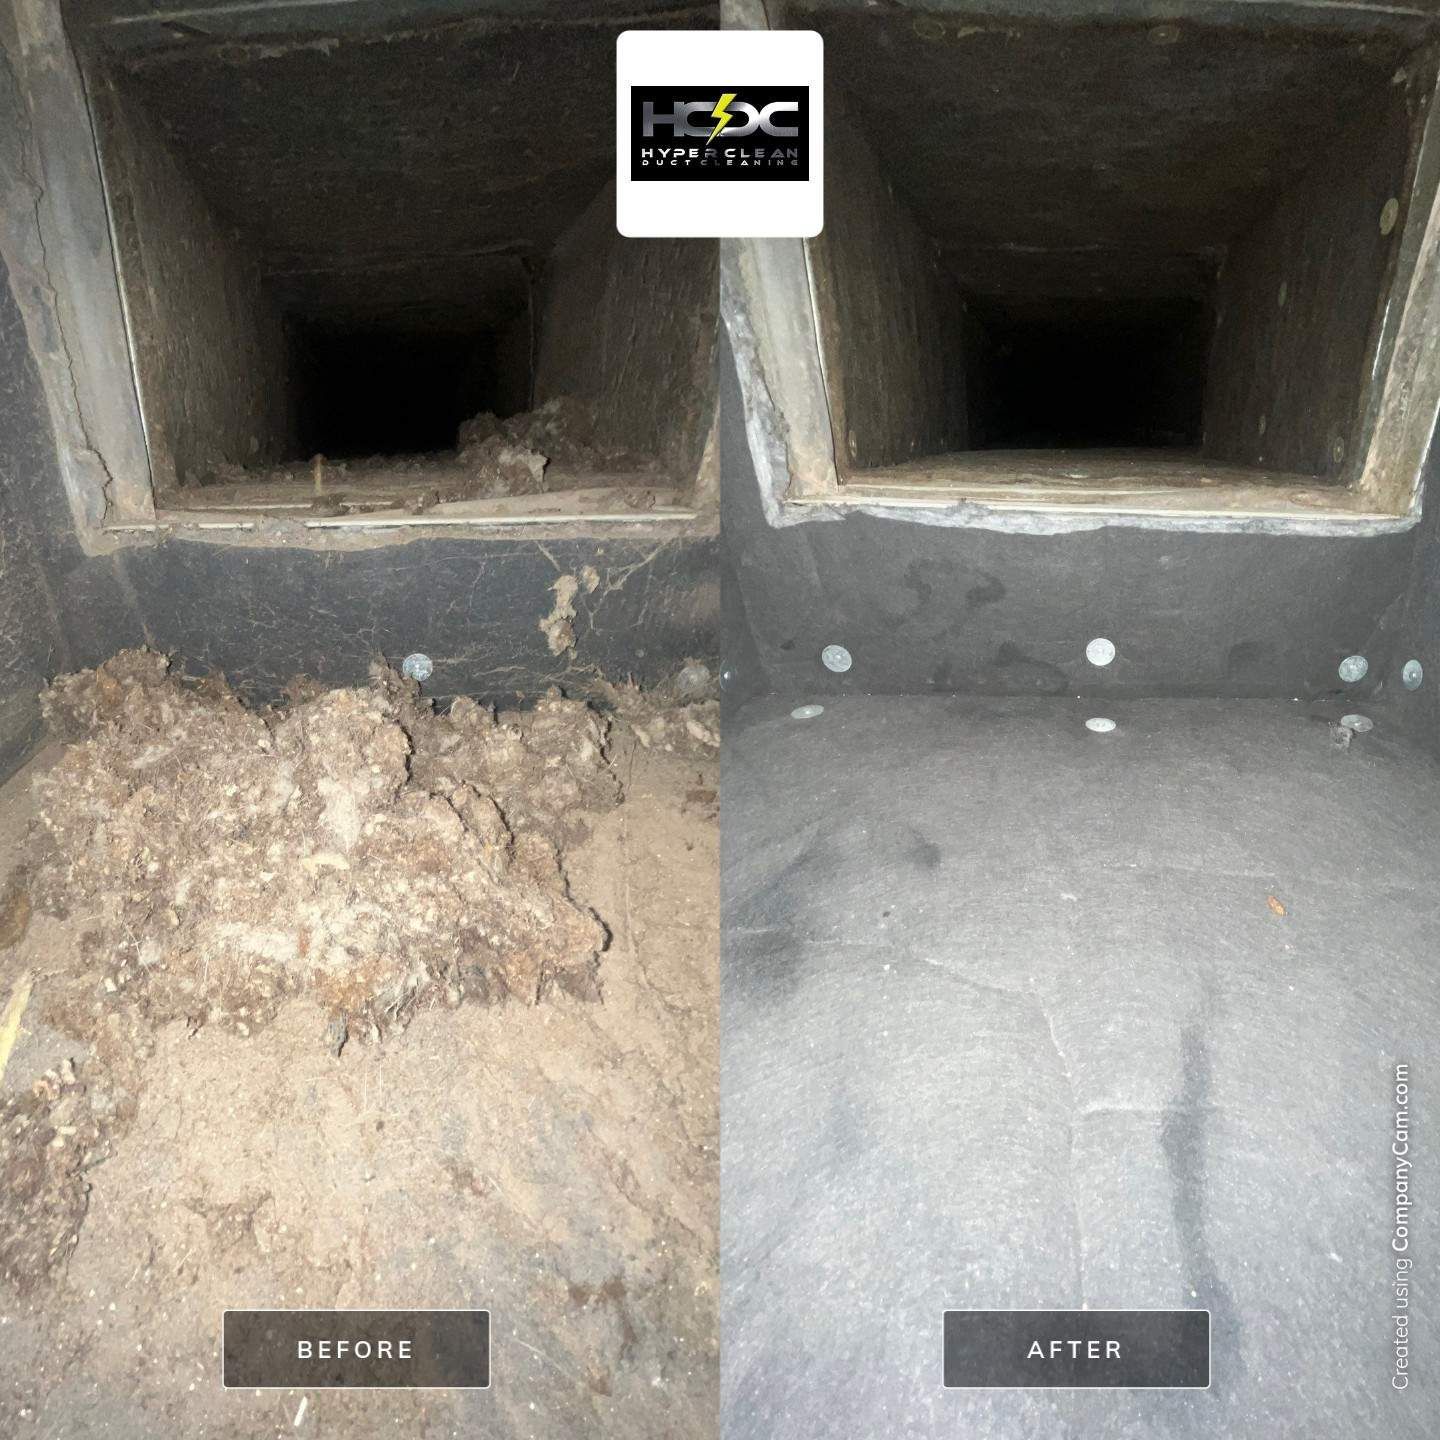 Don't settle for less. Ensure your ducts are cleaned properly by experts. Call or text us today for 